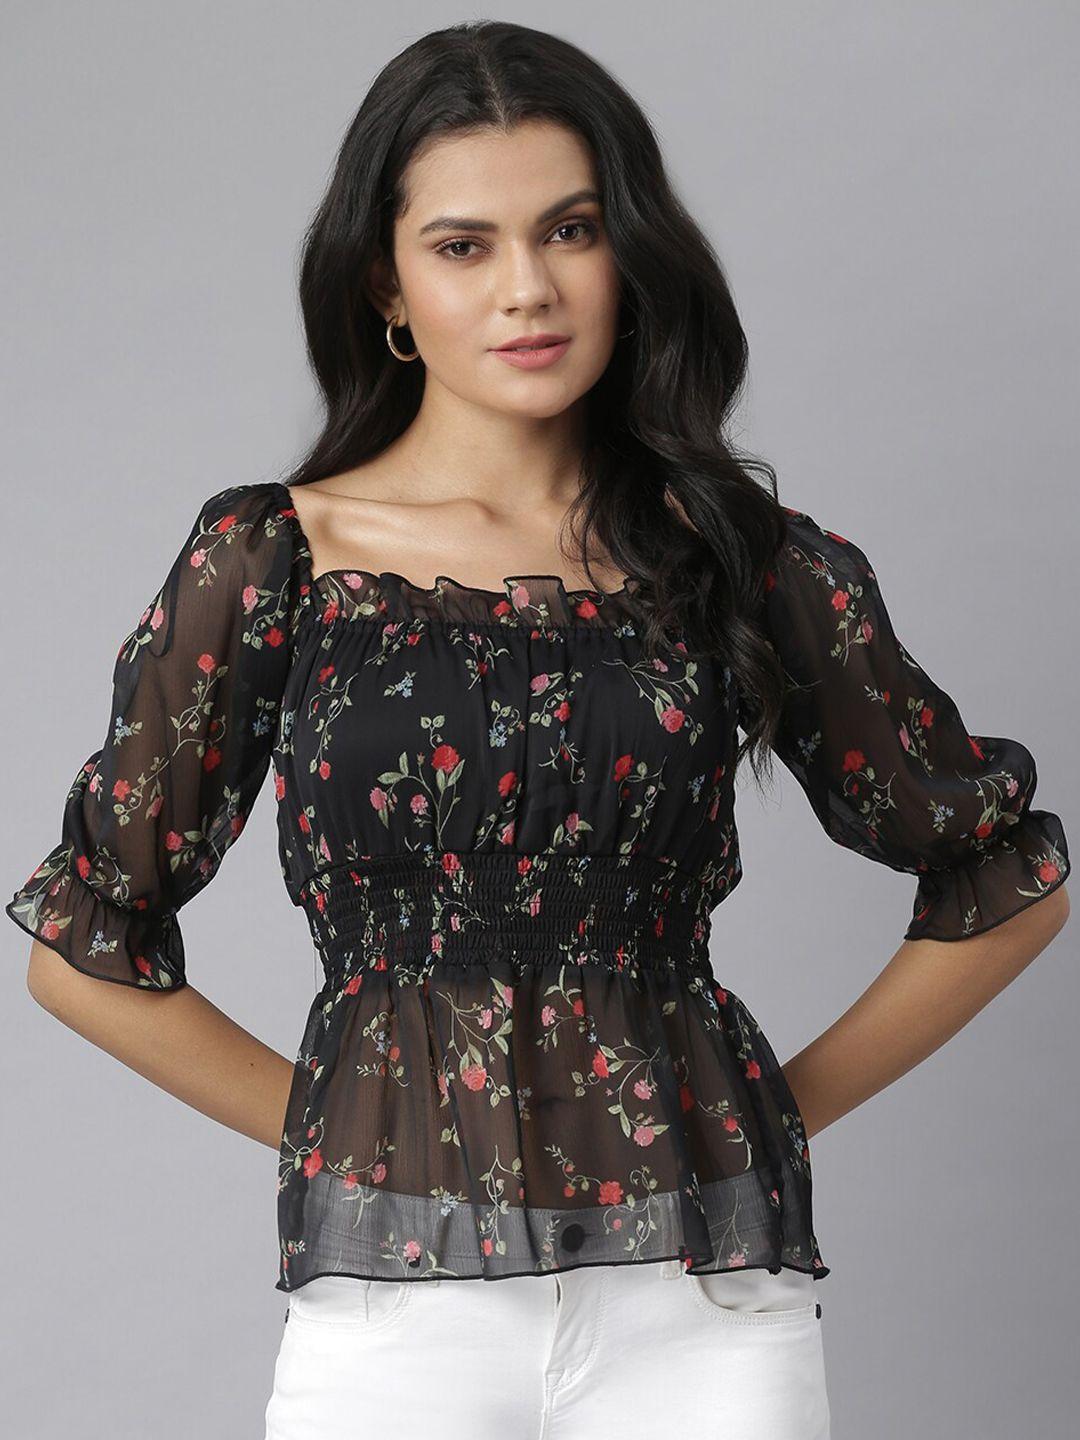 KASSUALLY Black & Red Floral Georgette Cinched Waist Top